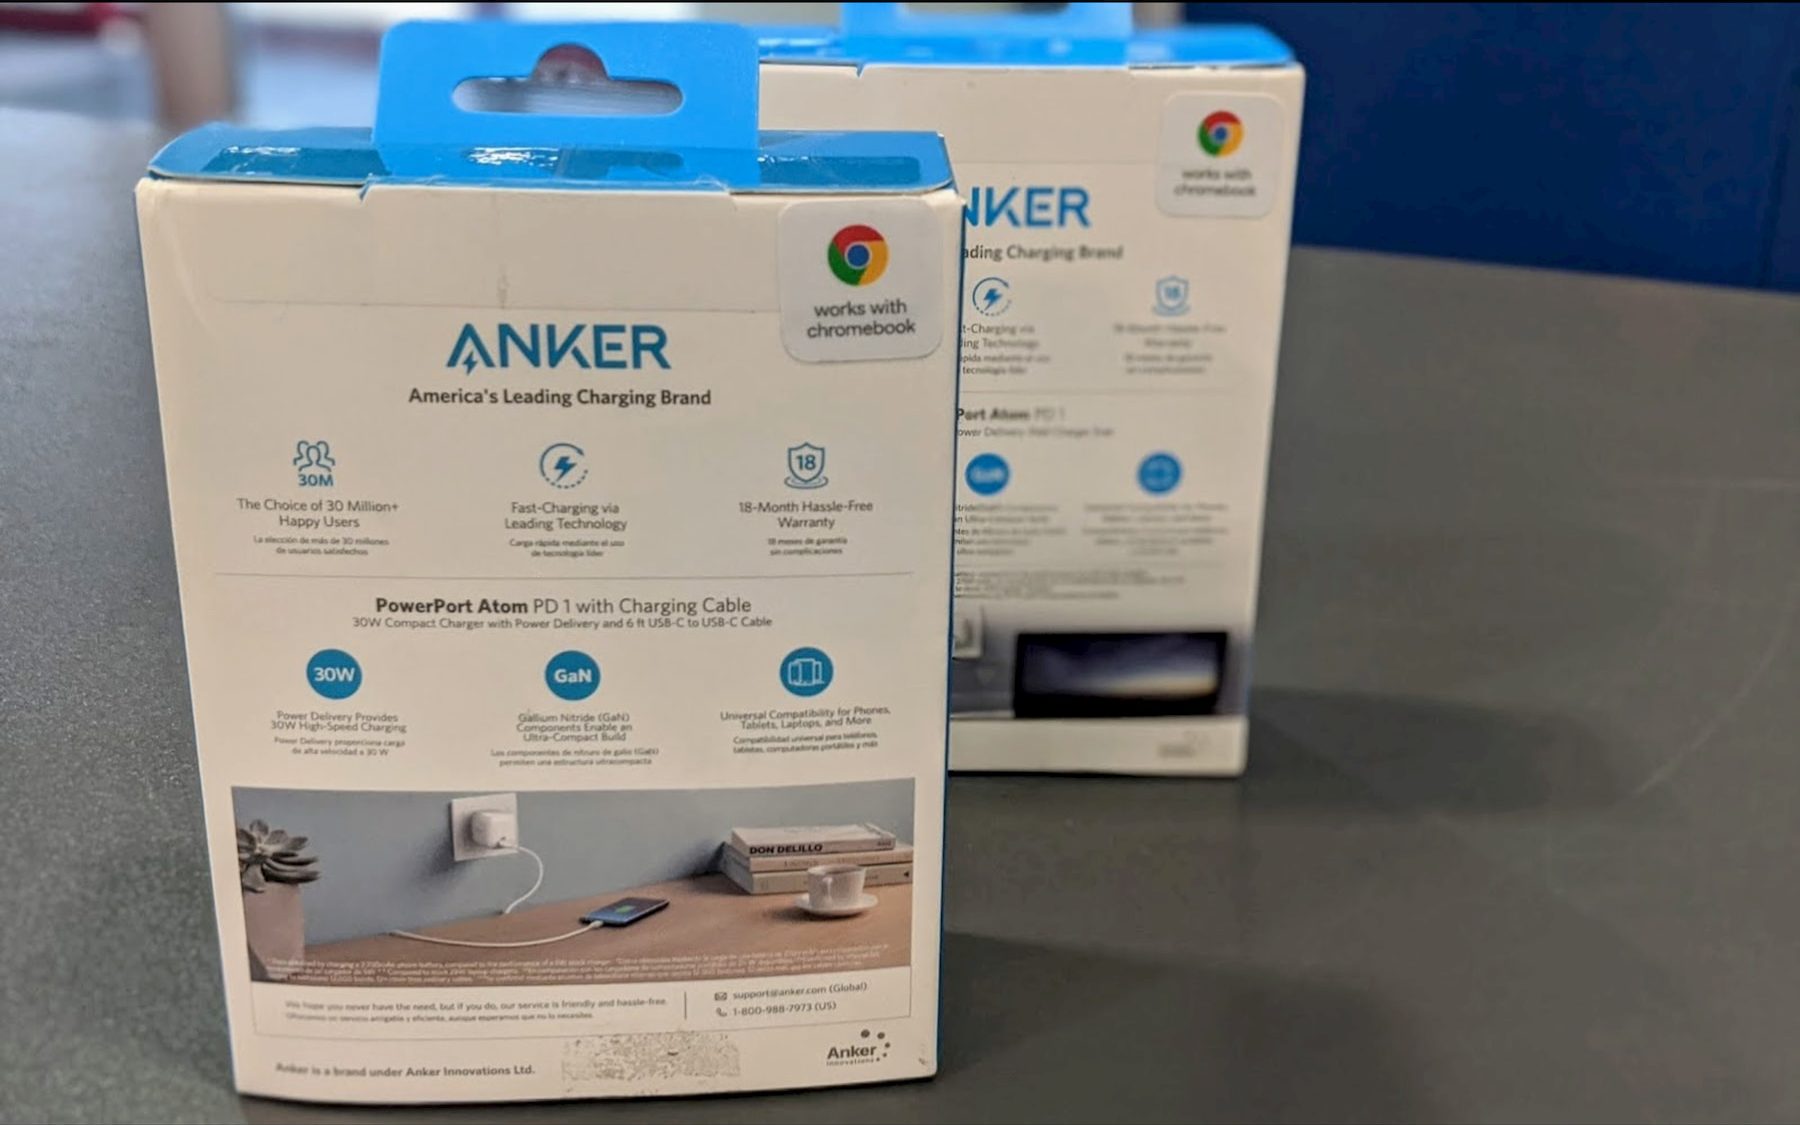 anker works with chromebook sticker